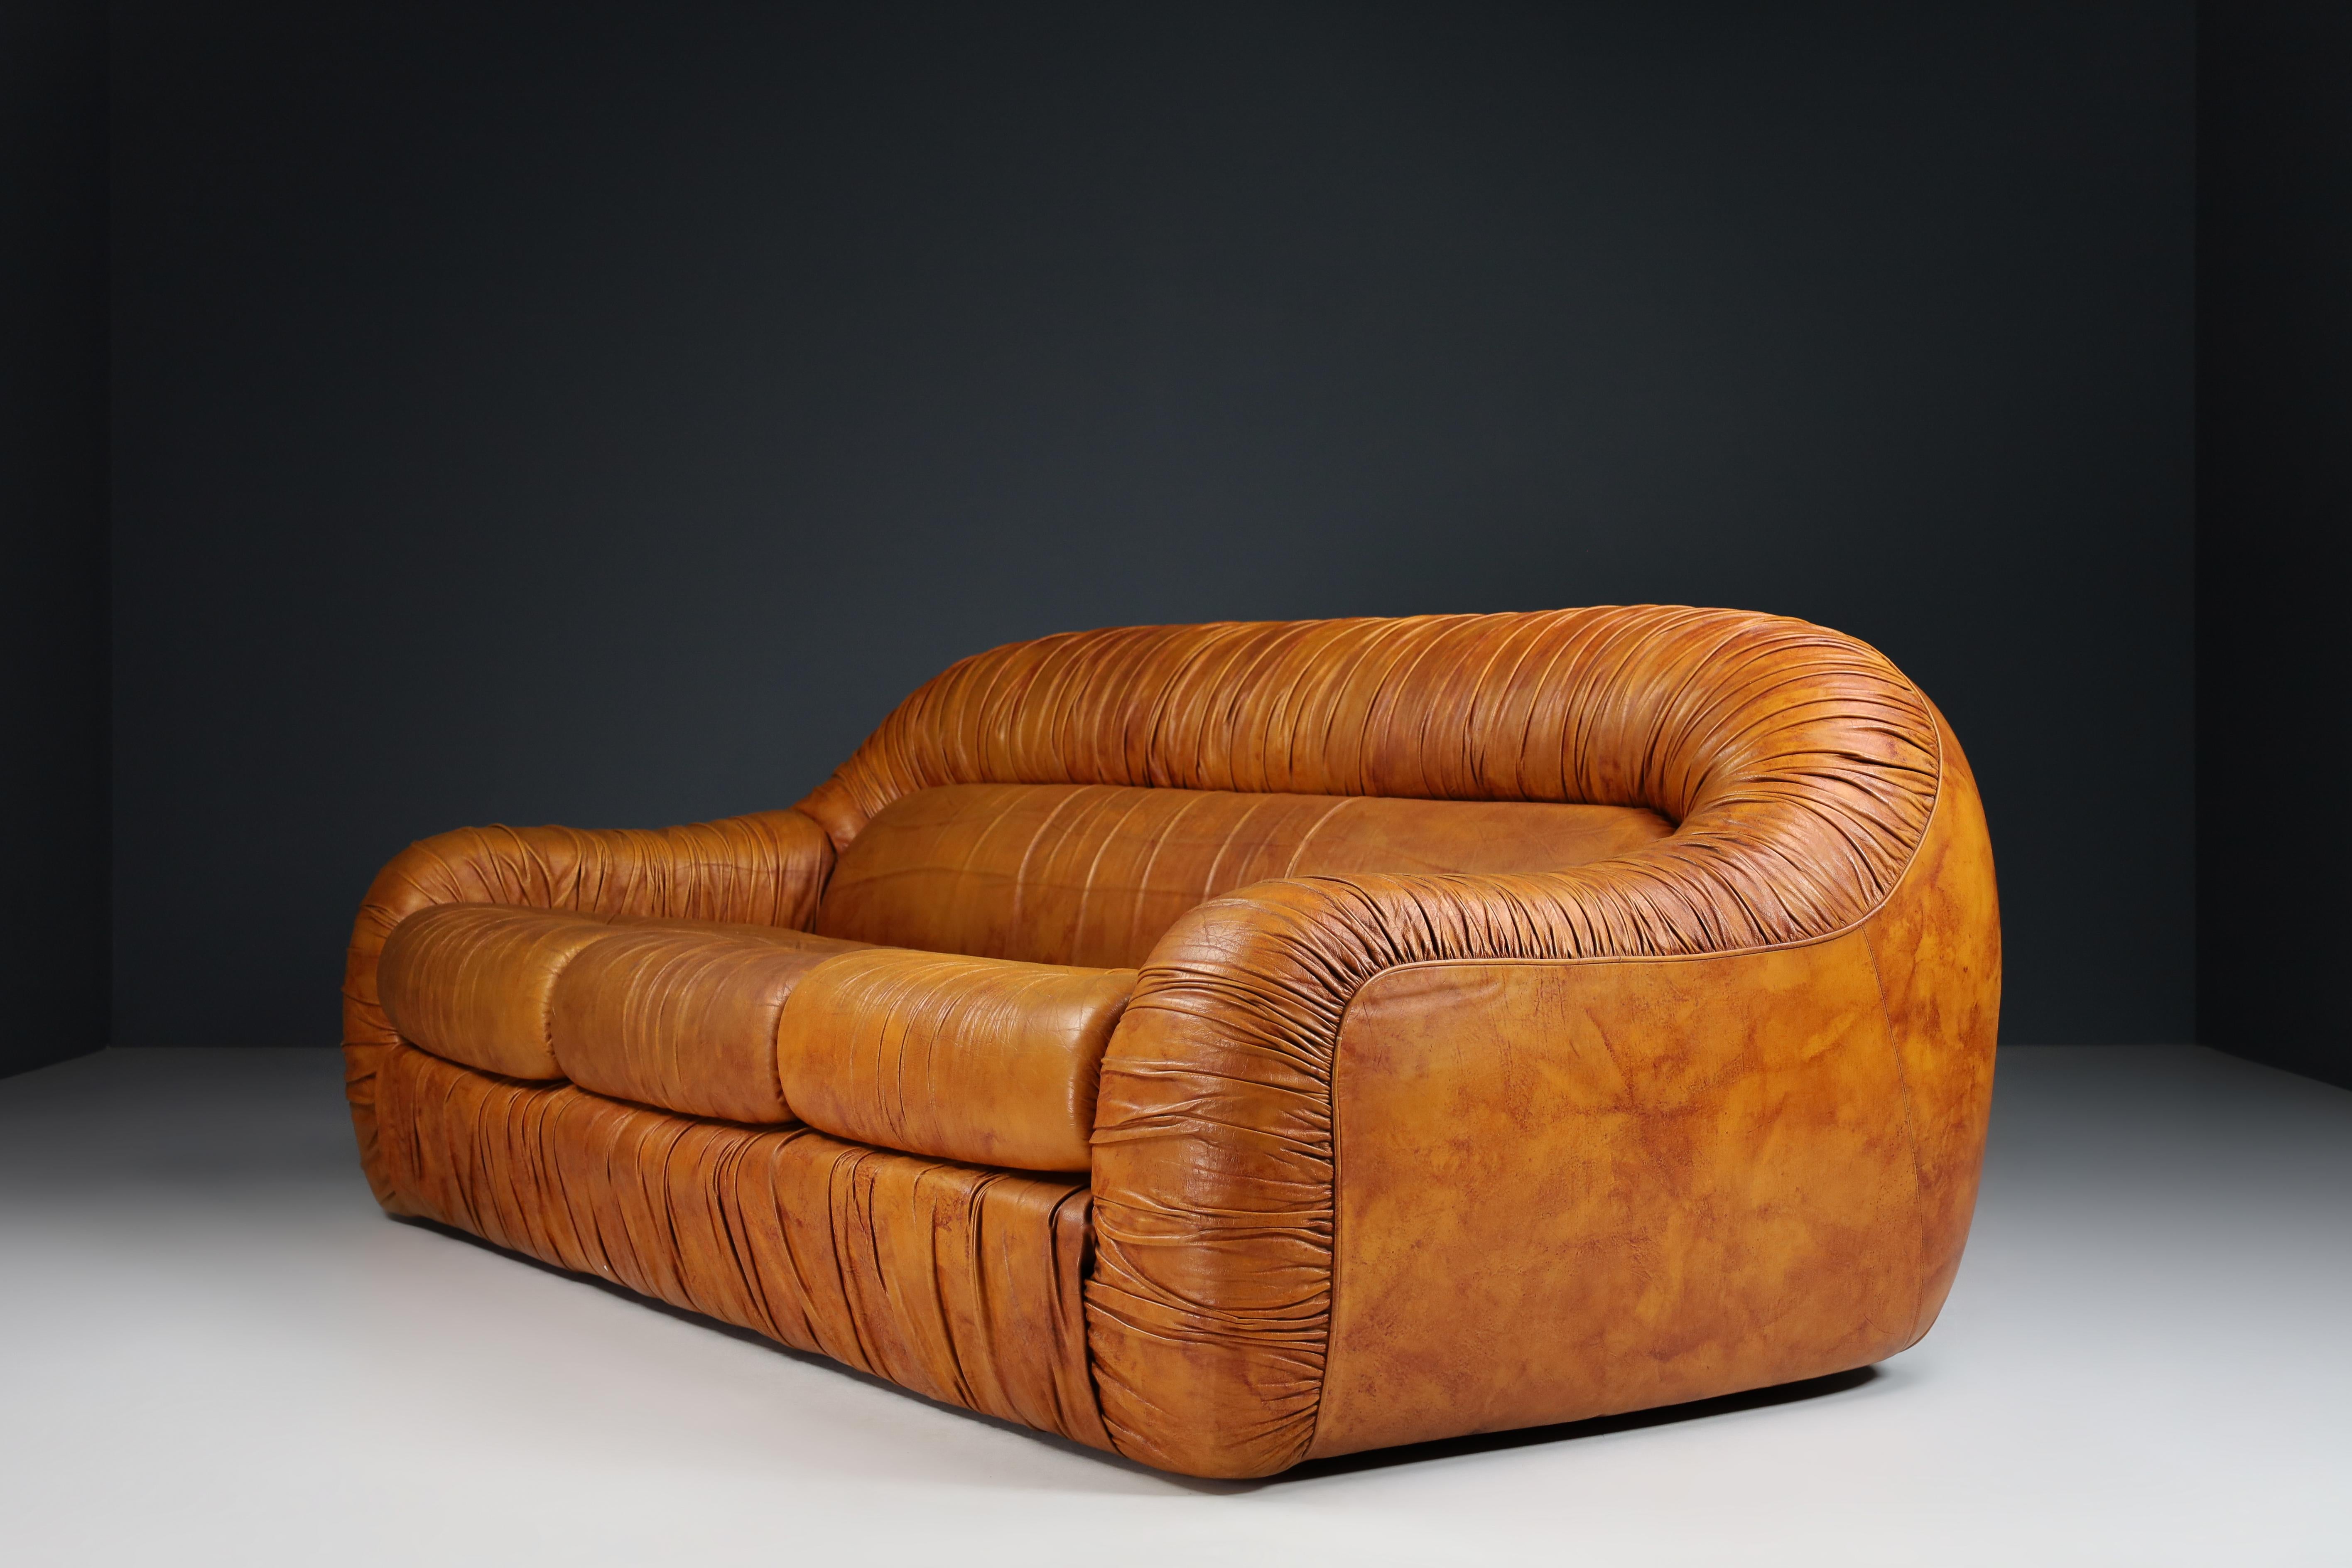 Large lounge sofa in cognac leather by George Bighinello for Eurosalotto, Italy, in the 1970s. 

A large lounge sofa in cognac leather by George Bighinello for Eurosalotto., Italy, in the 1970s. A large, fluffy, stylish lounge sofas that feature